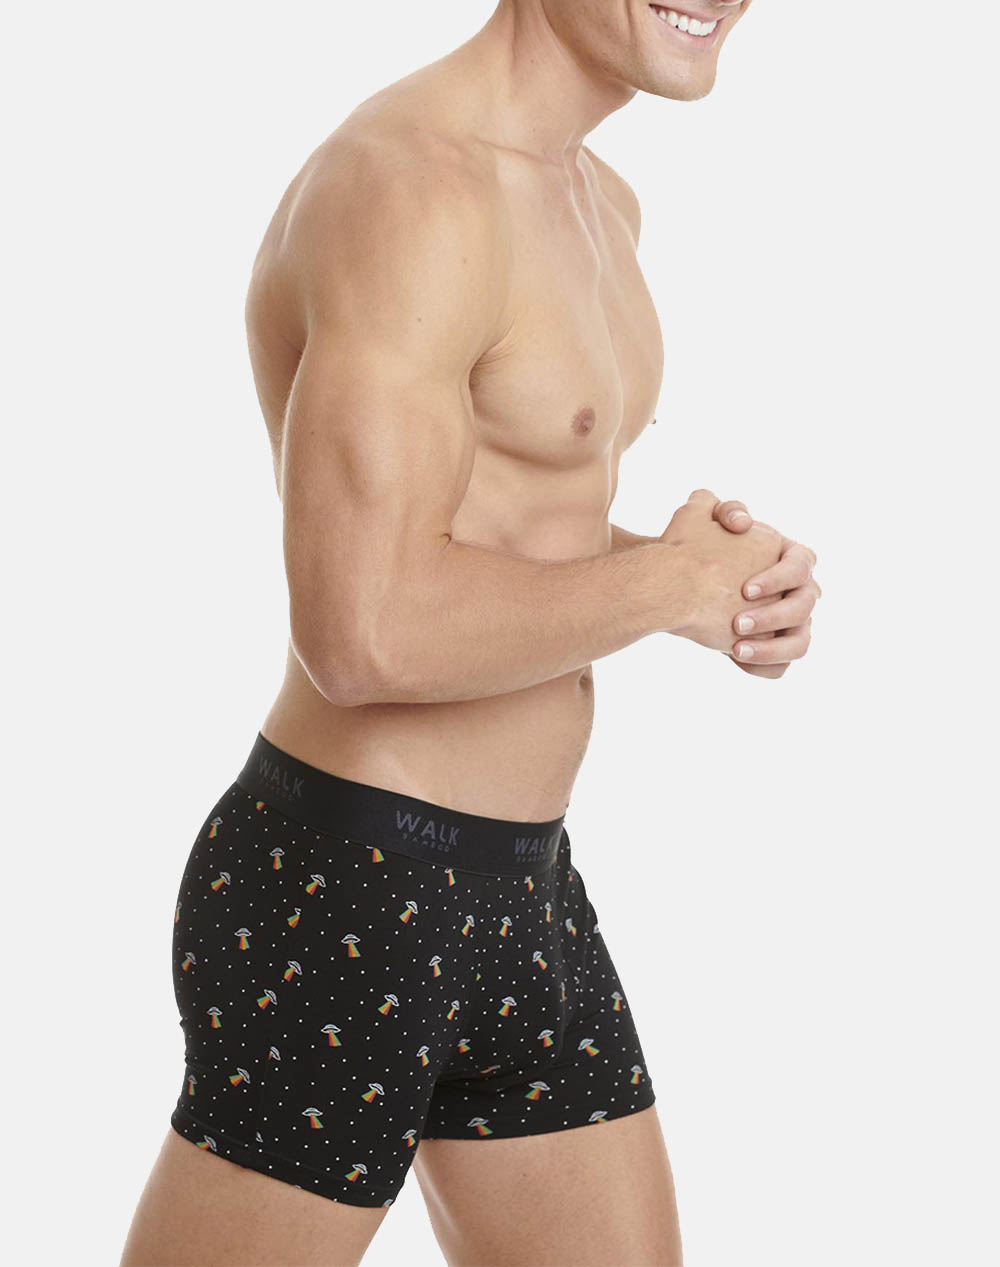 WALK MENS BOXER WITH UFO PATTERN